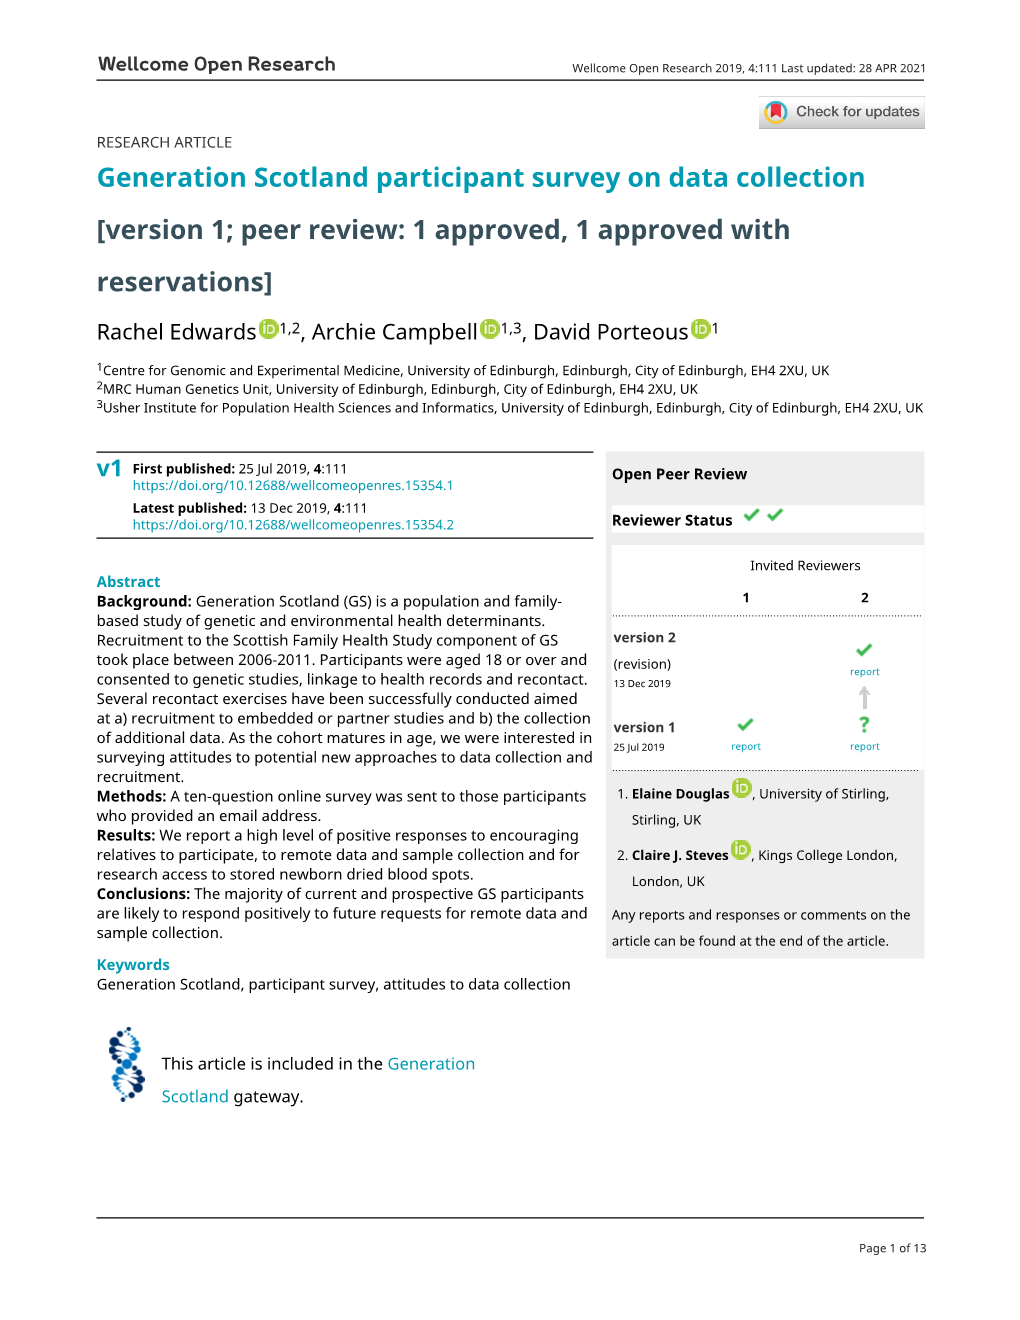 Generation Scotland Participant Survey on Data Collection [Version 1; Peer Review: 1 Approved, 1 Approved with Reservations]